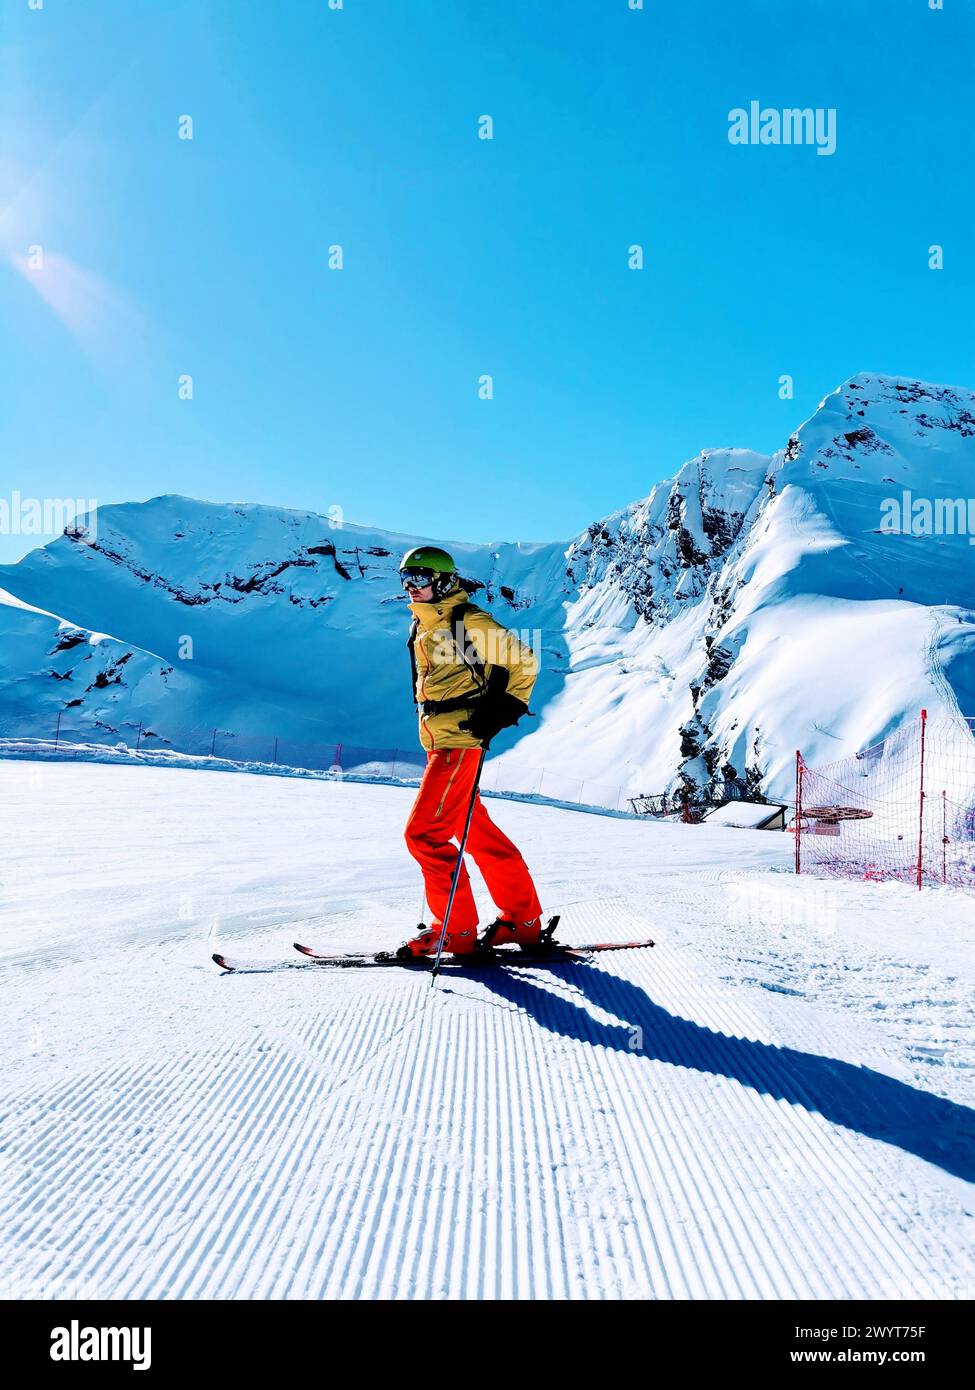 A skier in striking red pants surveys the snow-covered slopes, ready to ...